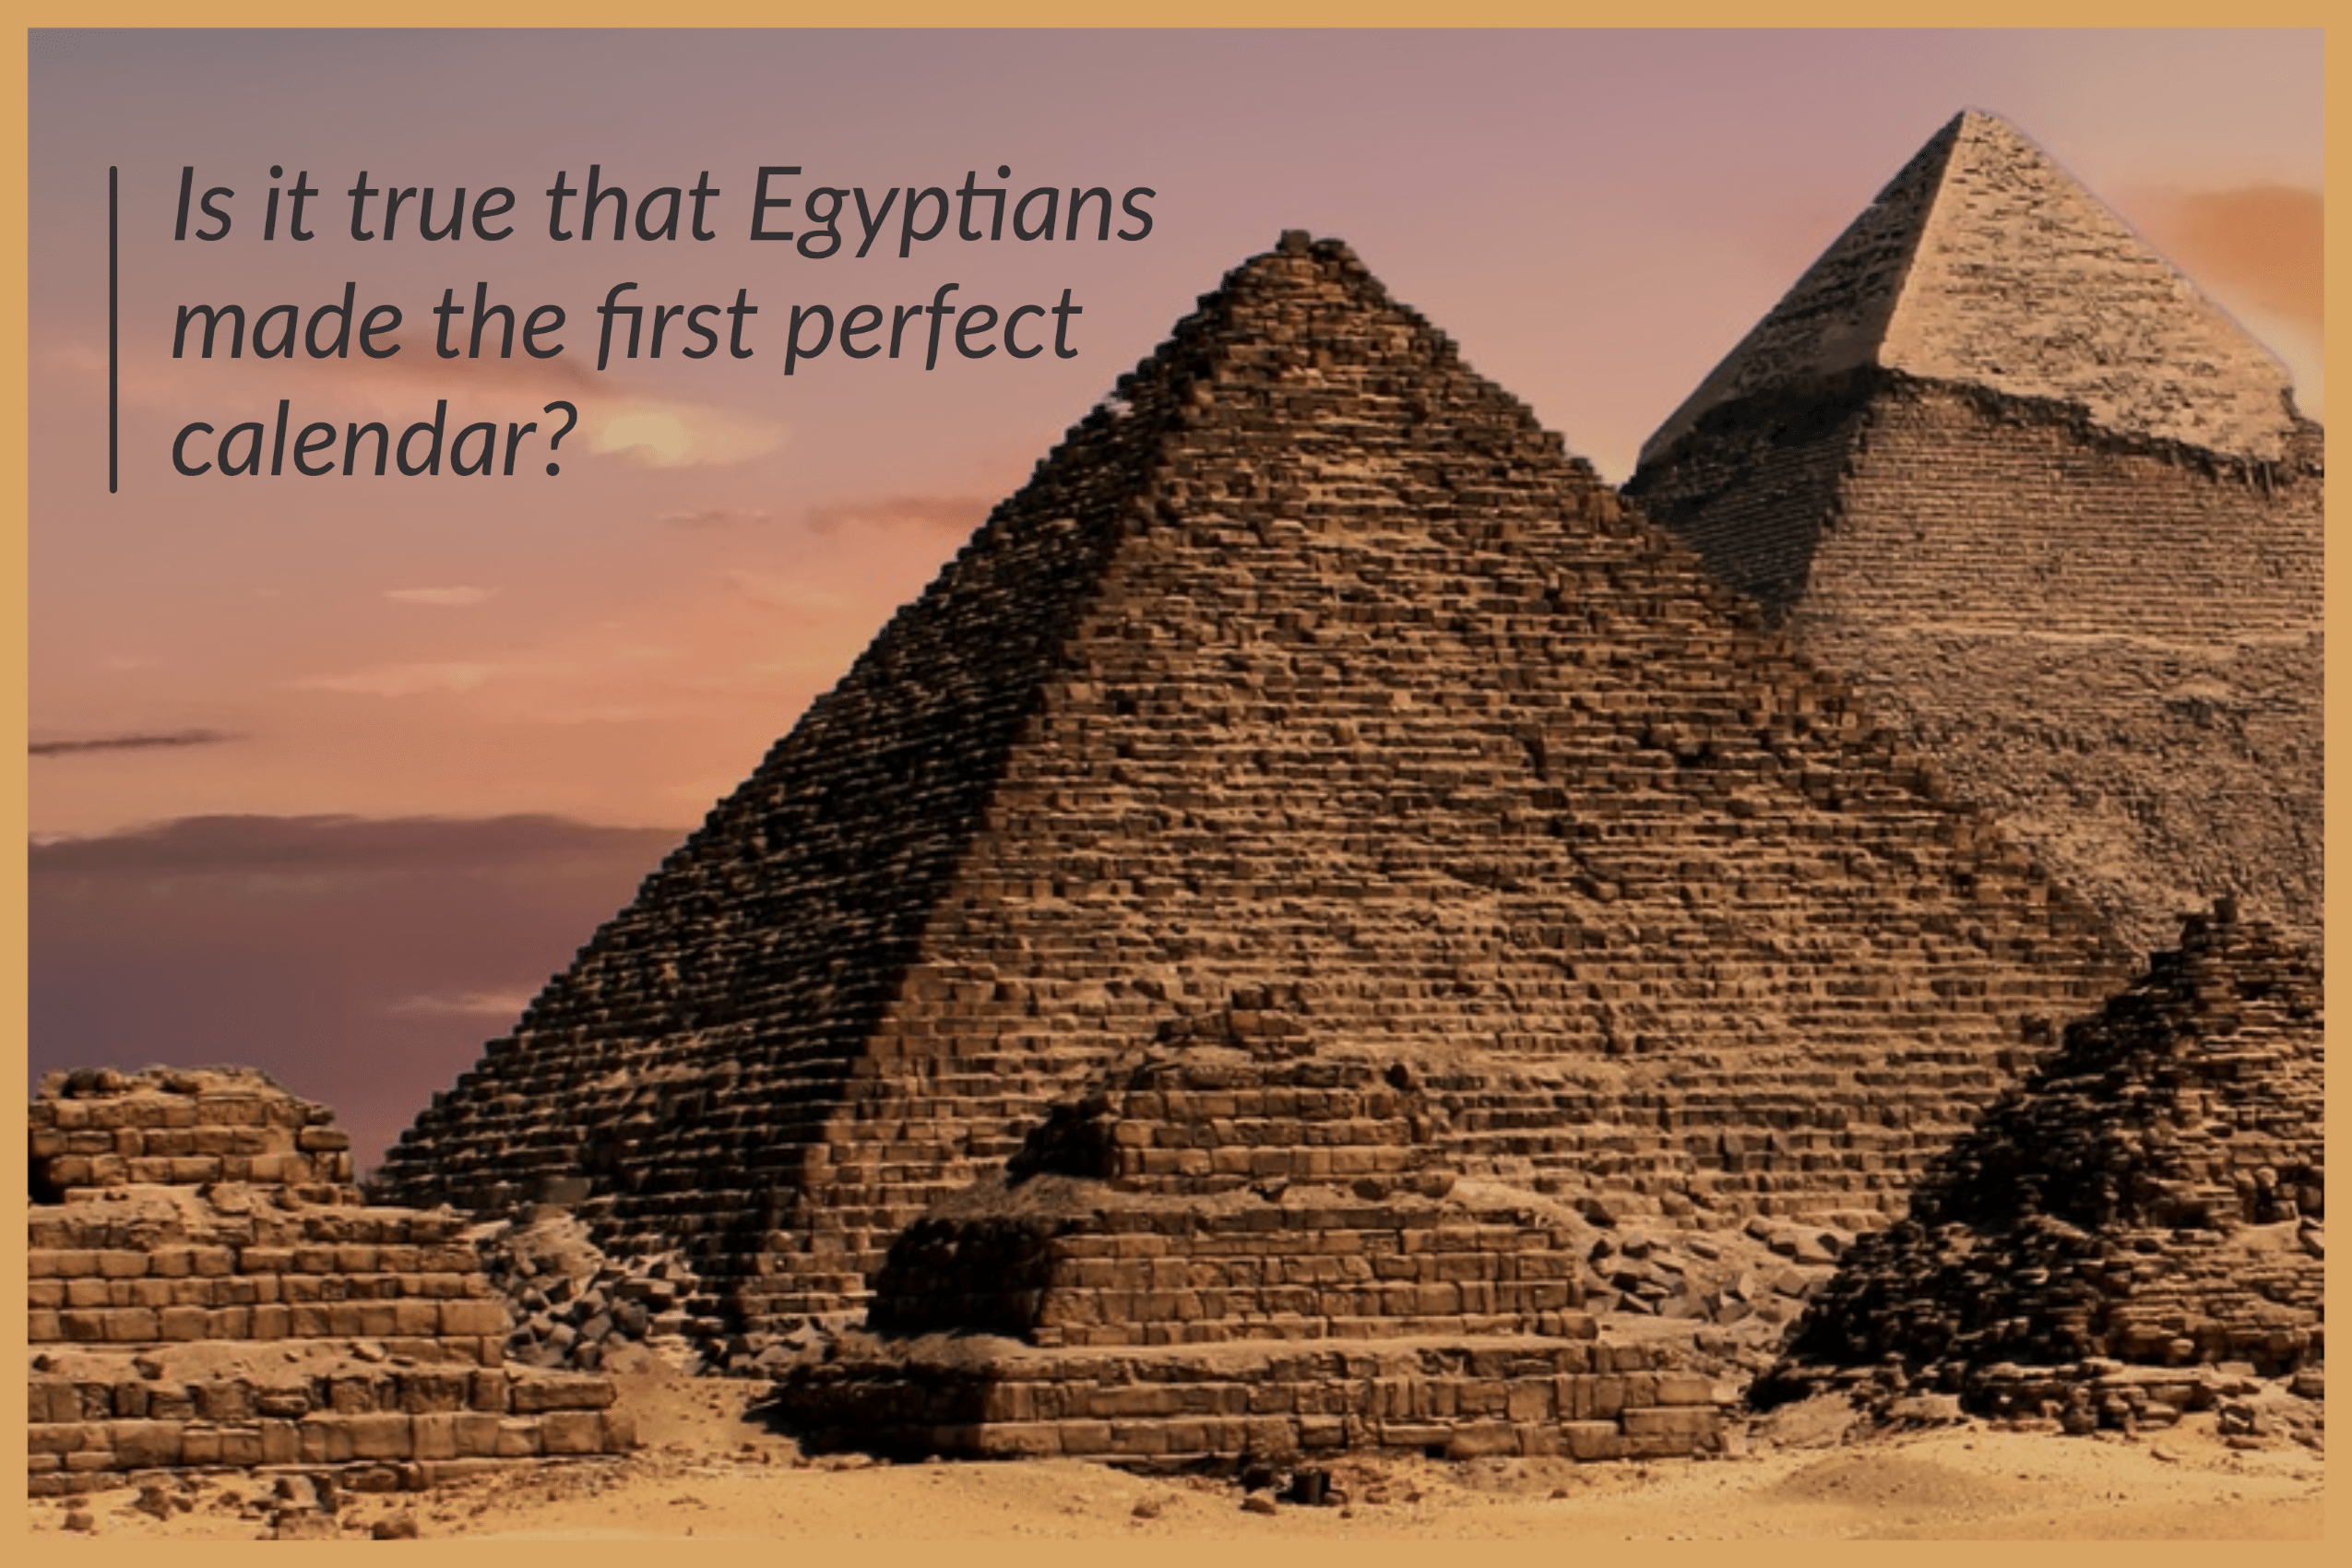 Is it true that Egyptians made the first perfect calendar?